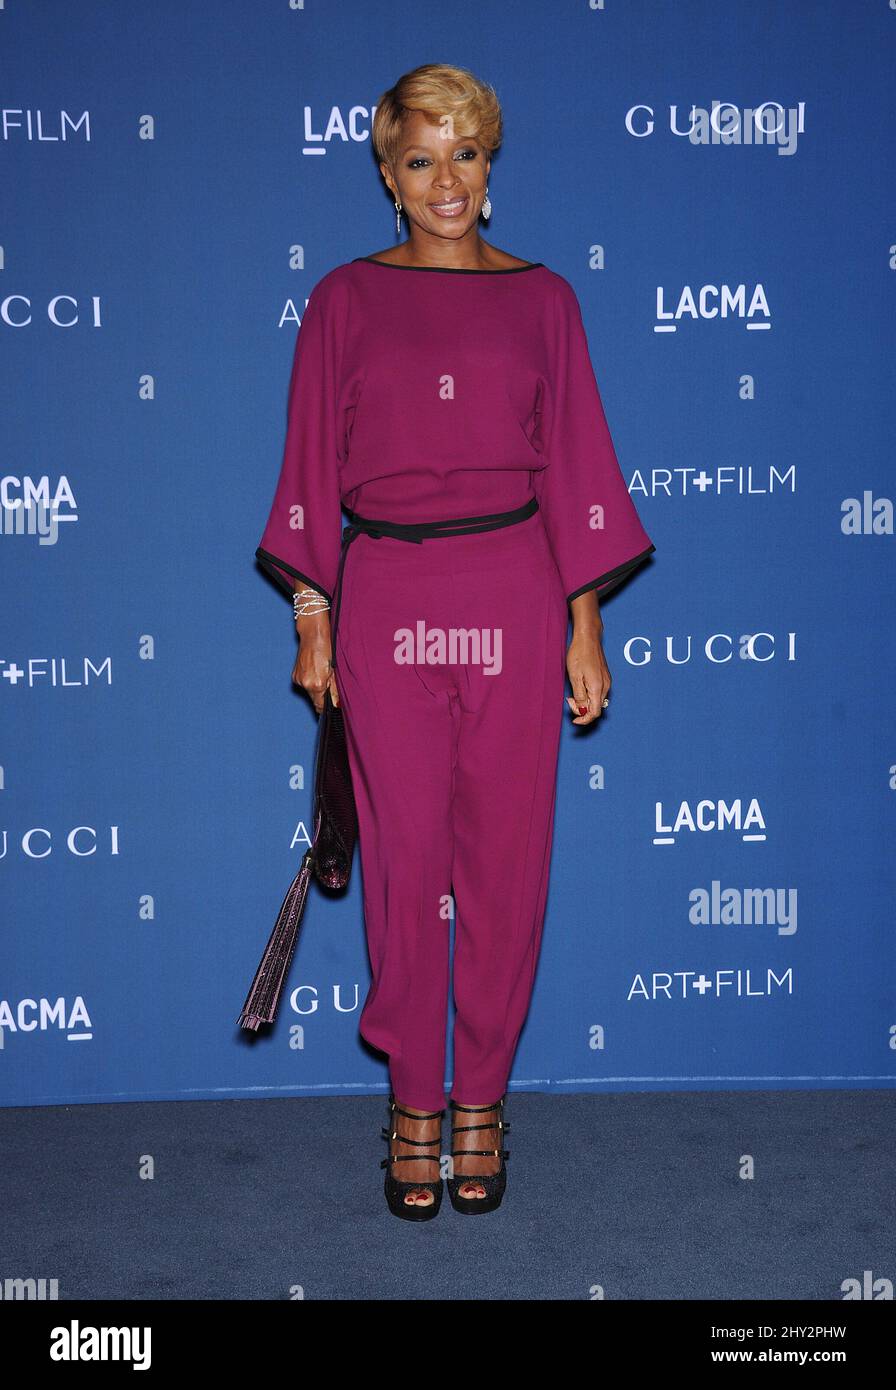 Mary J Blige Attending The Lacma Art Film Gala In Los Angeles